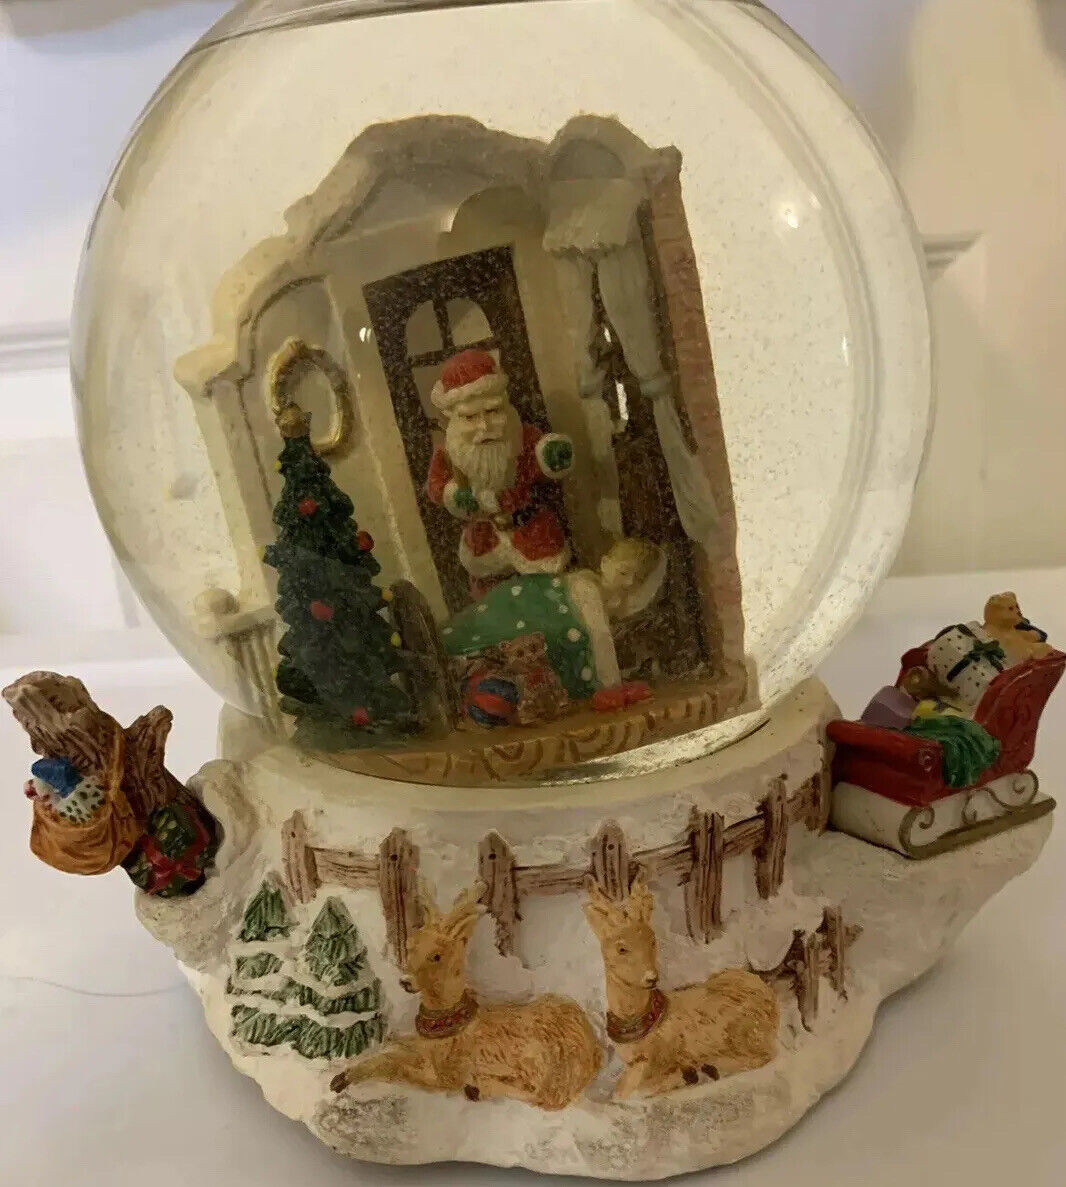 Vtg Santa Claus Is Coming To Town Musical Snow Globe Santa Delivers Presents